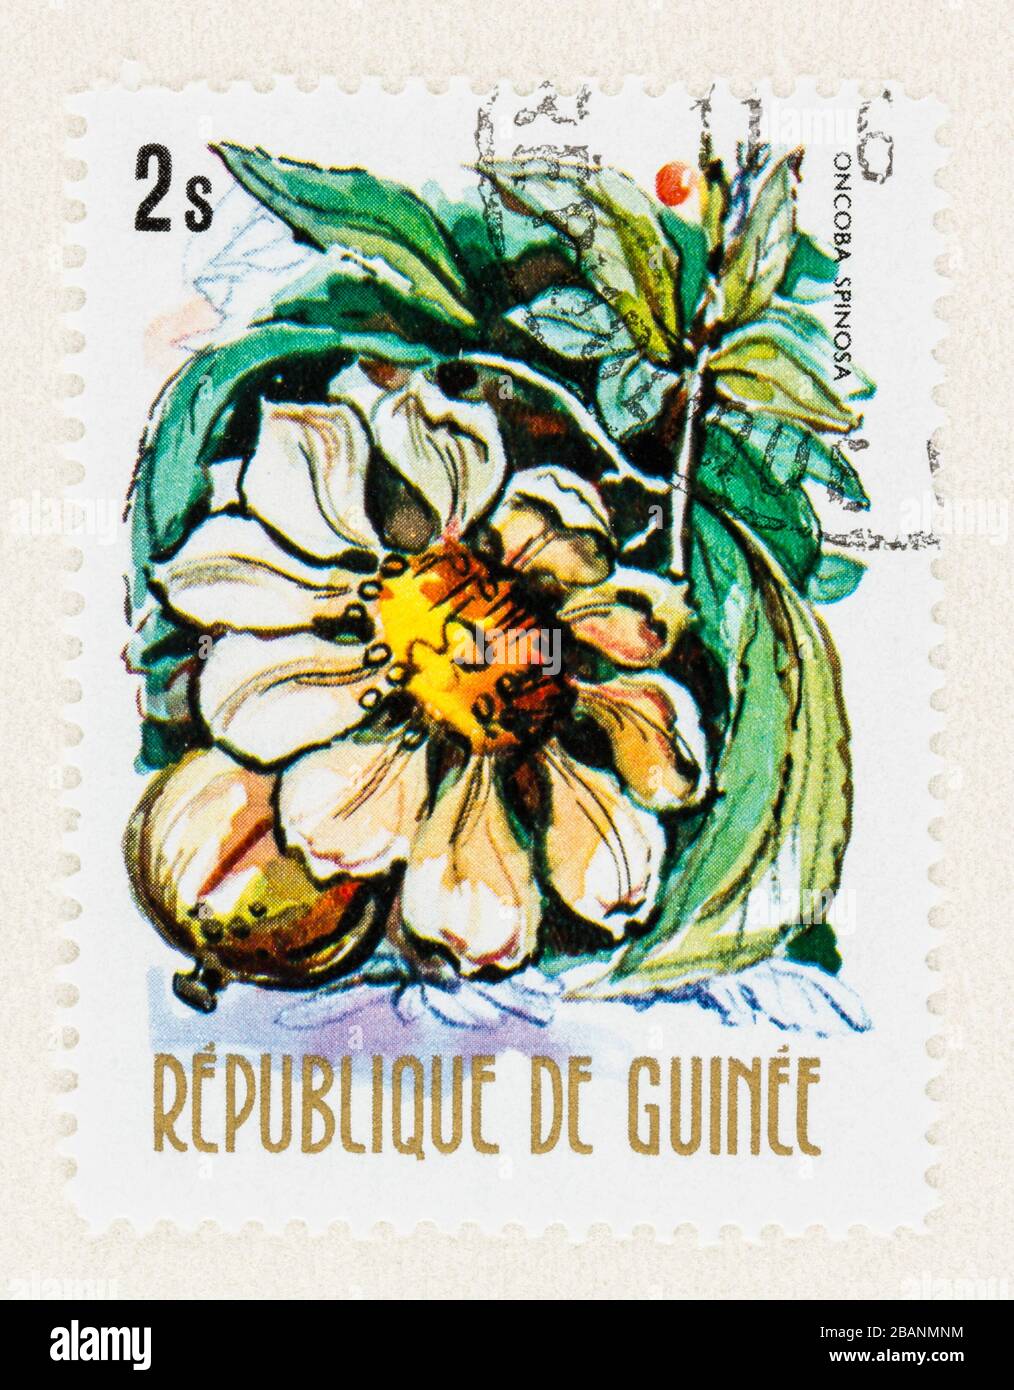 SEATTLE WASHINGTON - March 27, 2020: Close up of used Republic of Guinee postage stamp featuring Oncoba spinosa tree flower. Stock Photo